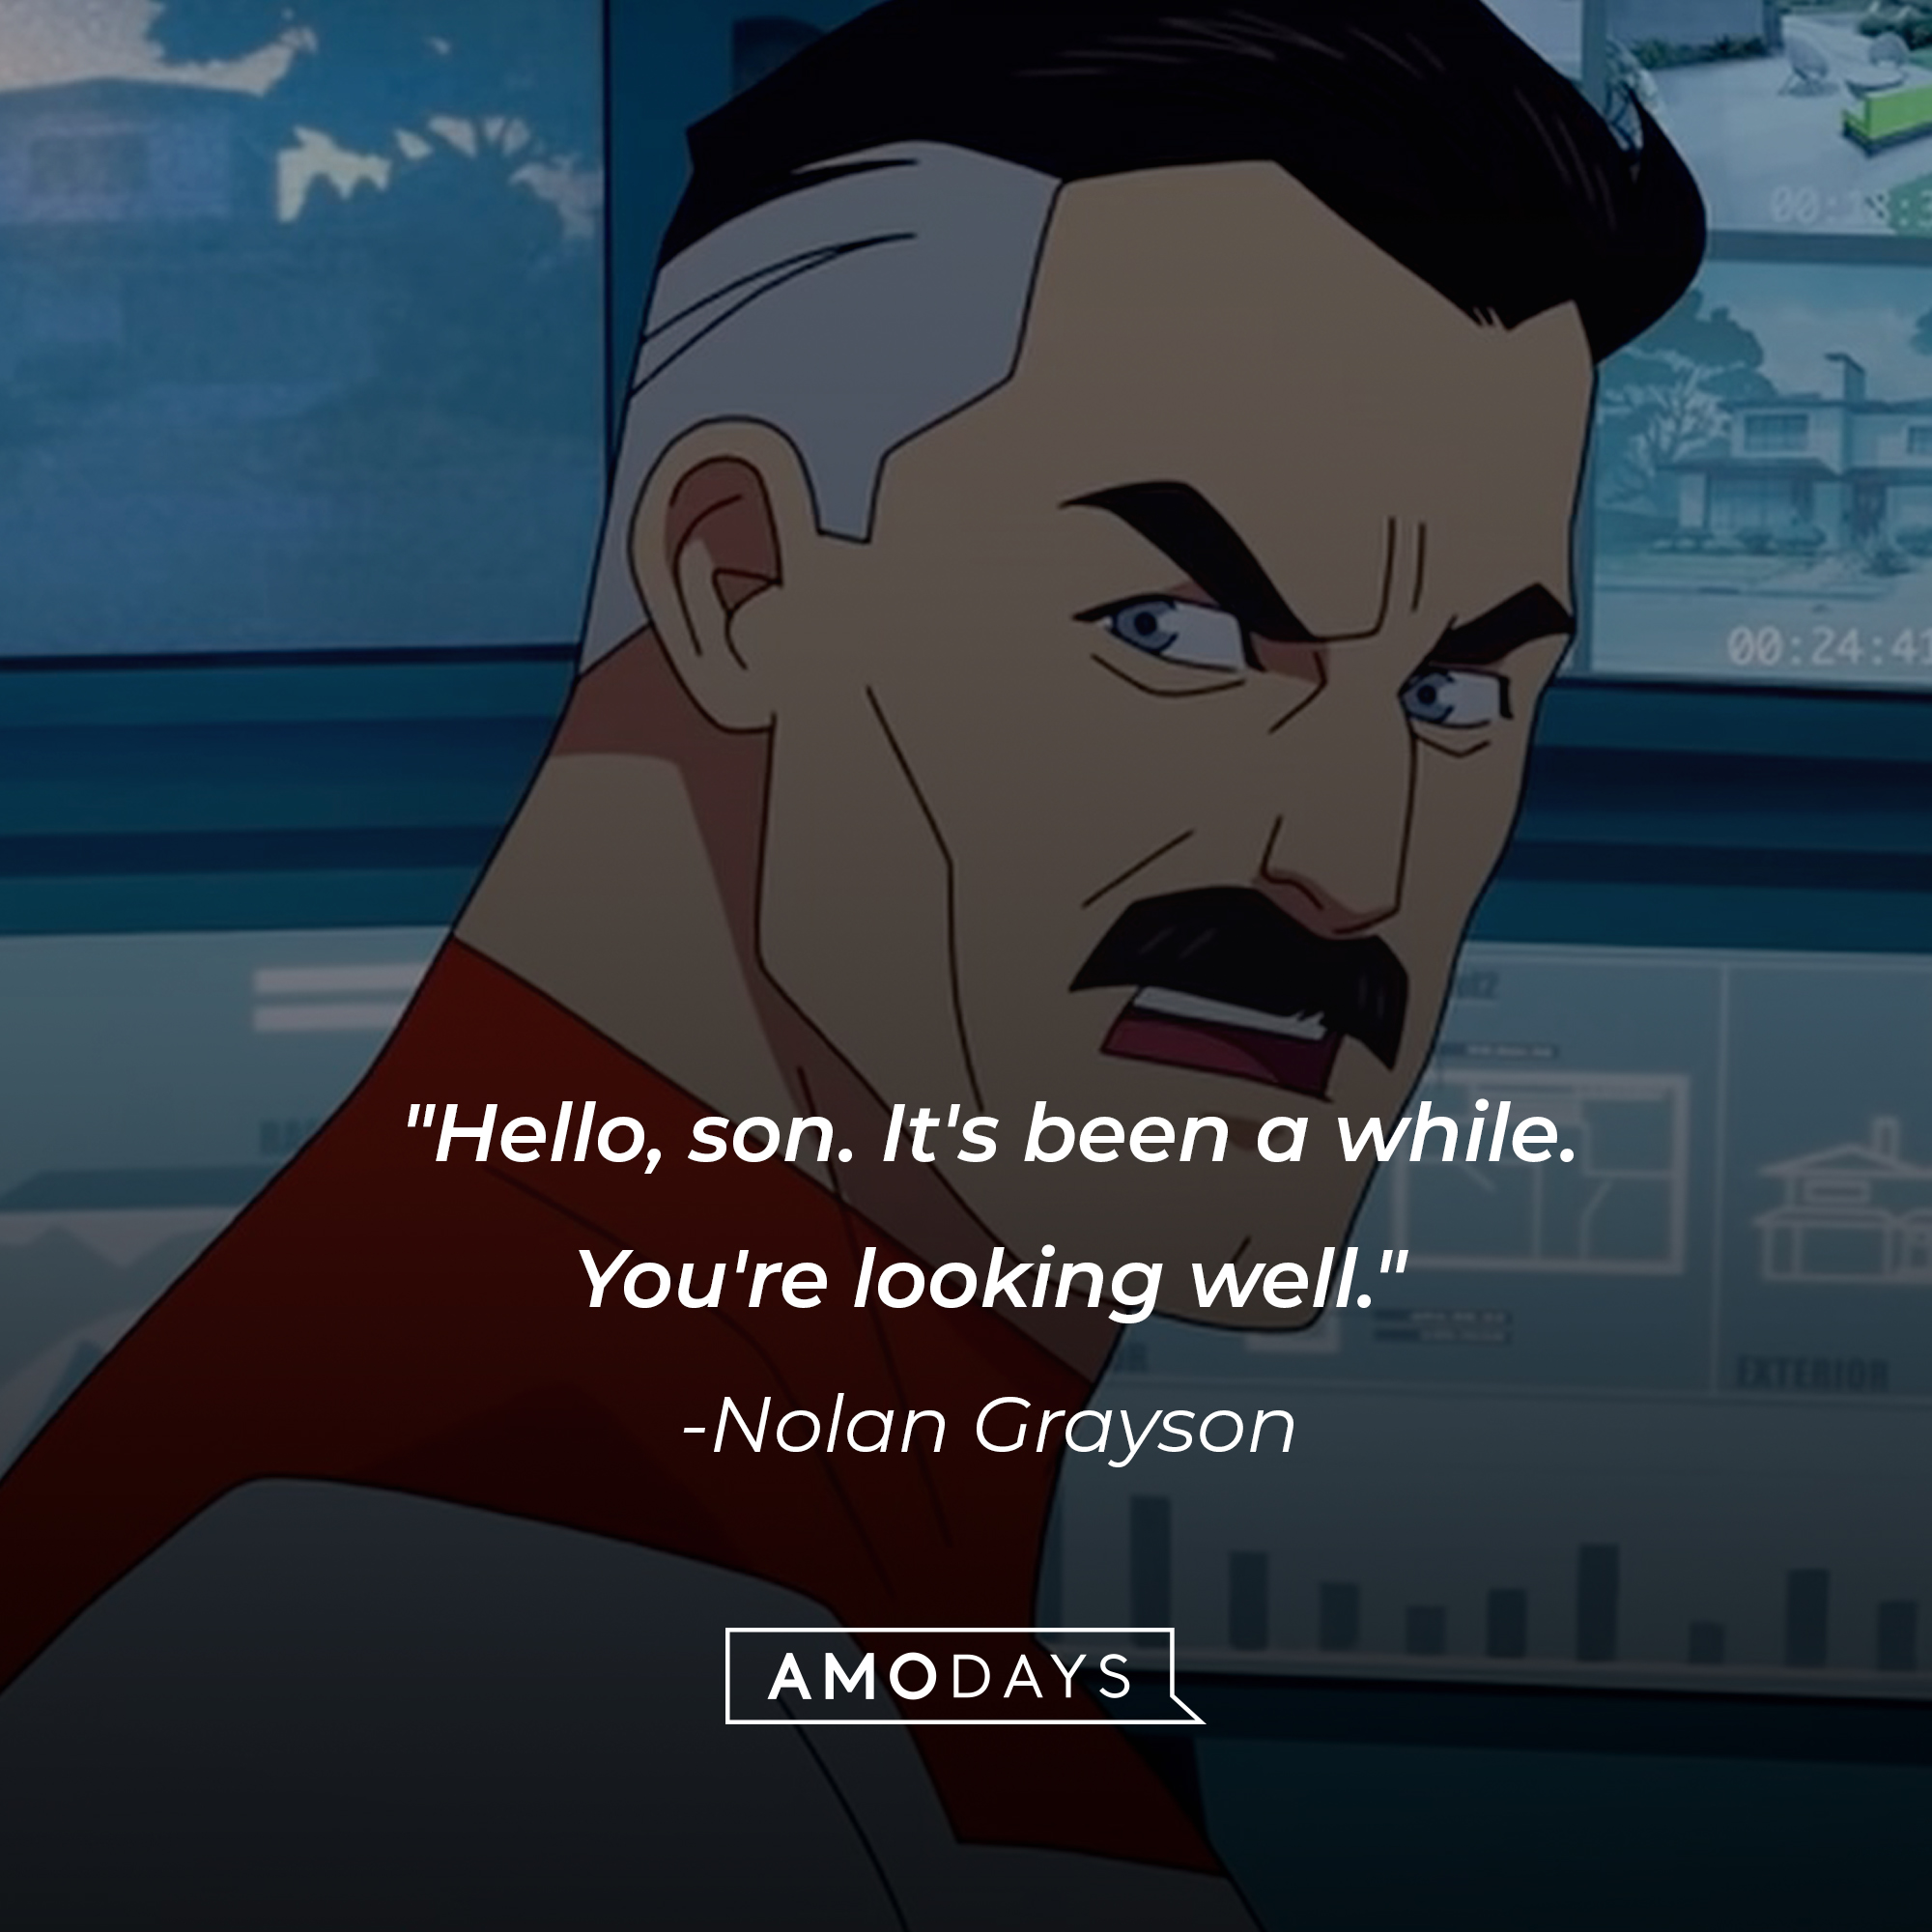 Nolan Grayson's quote: "Hello, son. It's been a while. You're looking well." | Source: Facebook.com/Invincibleuniverse